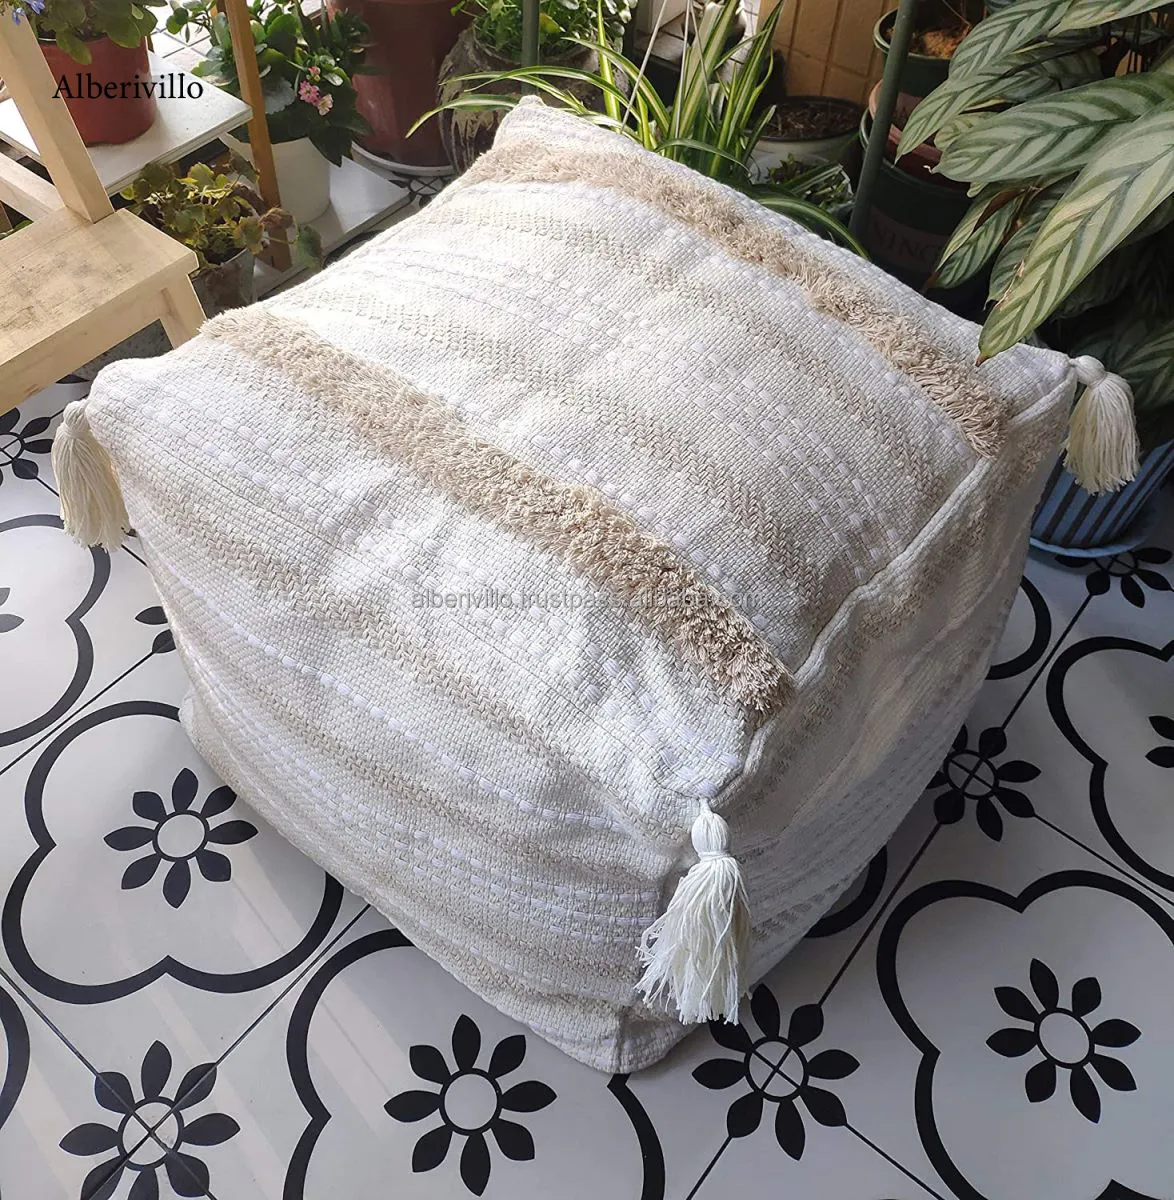 Wholesale Indian Moroccan Pouf Ottoman Boho Hand Woven Tufting Storage Rest Foot Poufs with Tassel